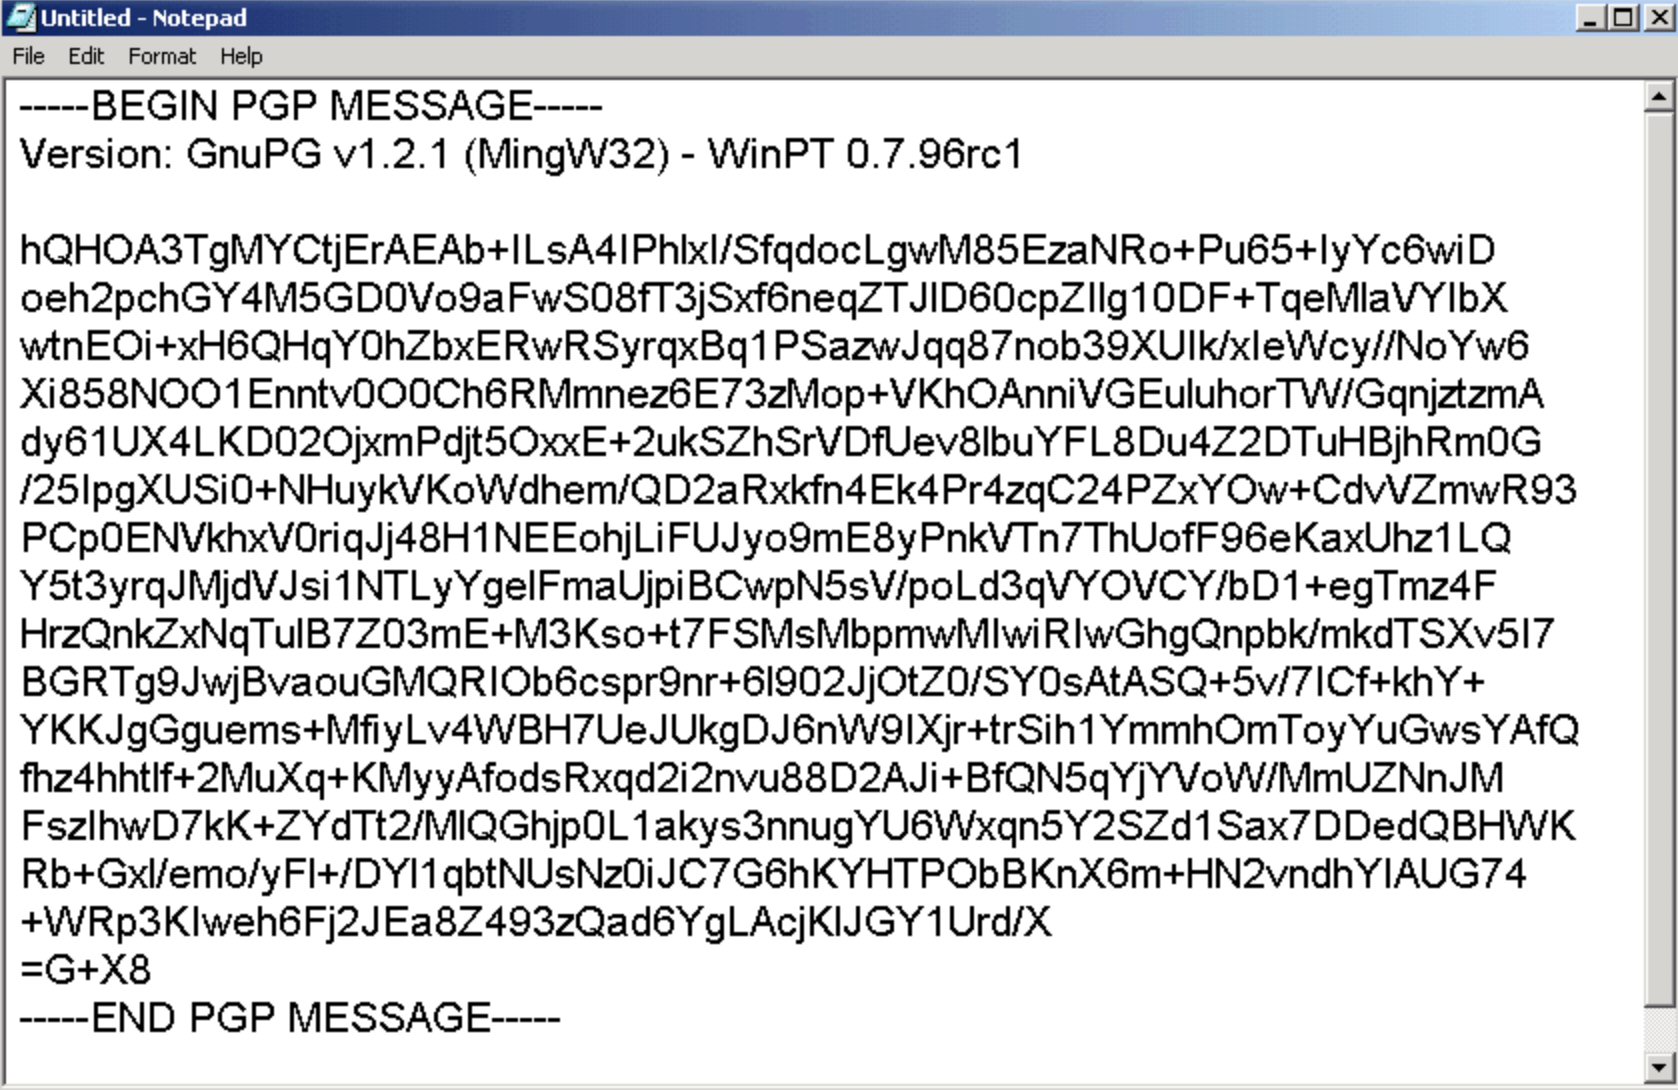 decrypt pgp message without key